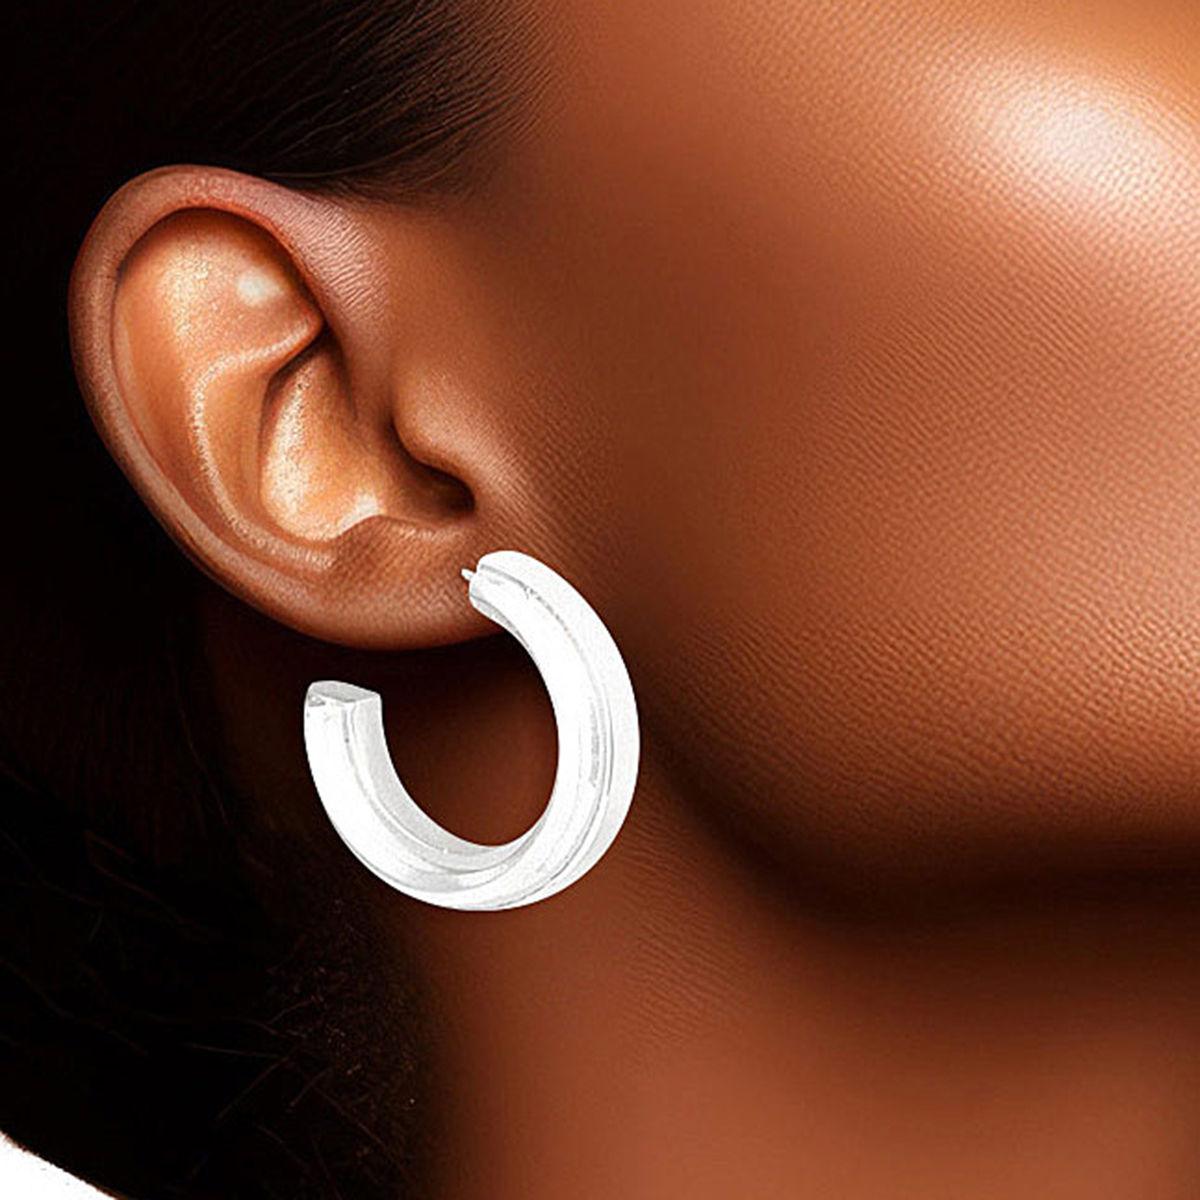 Timeless White Gold Hoops: Small Knife-edge Earrings for Any Occasion - Fashion Jewelry